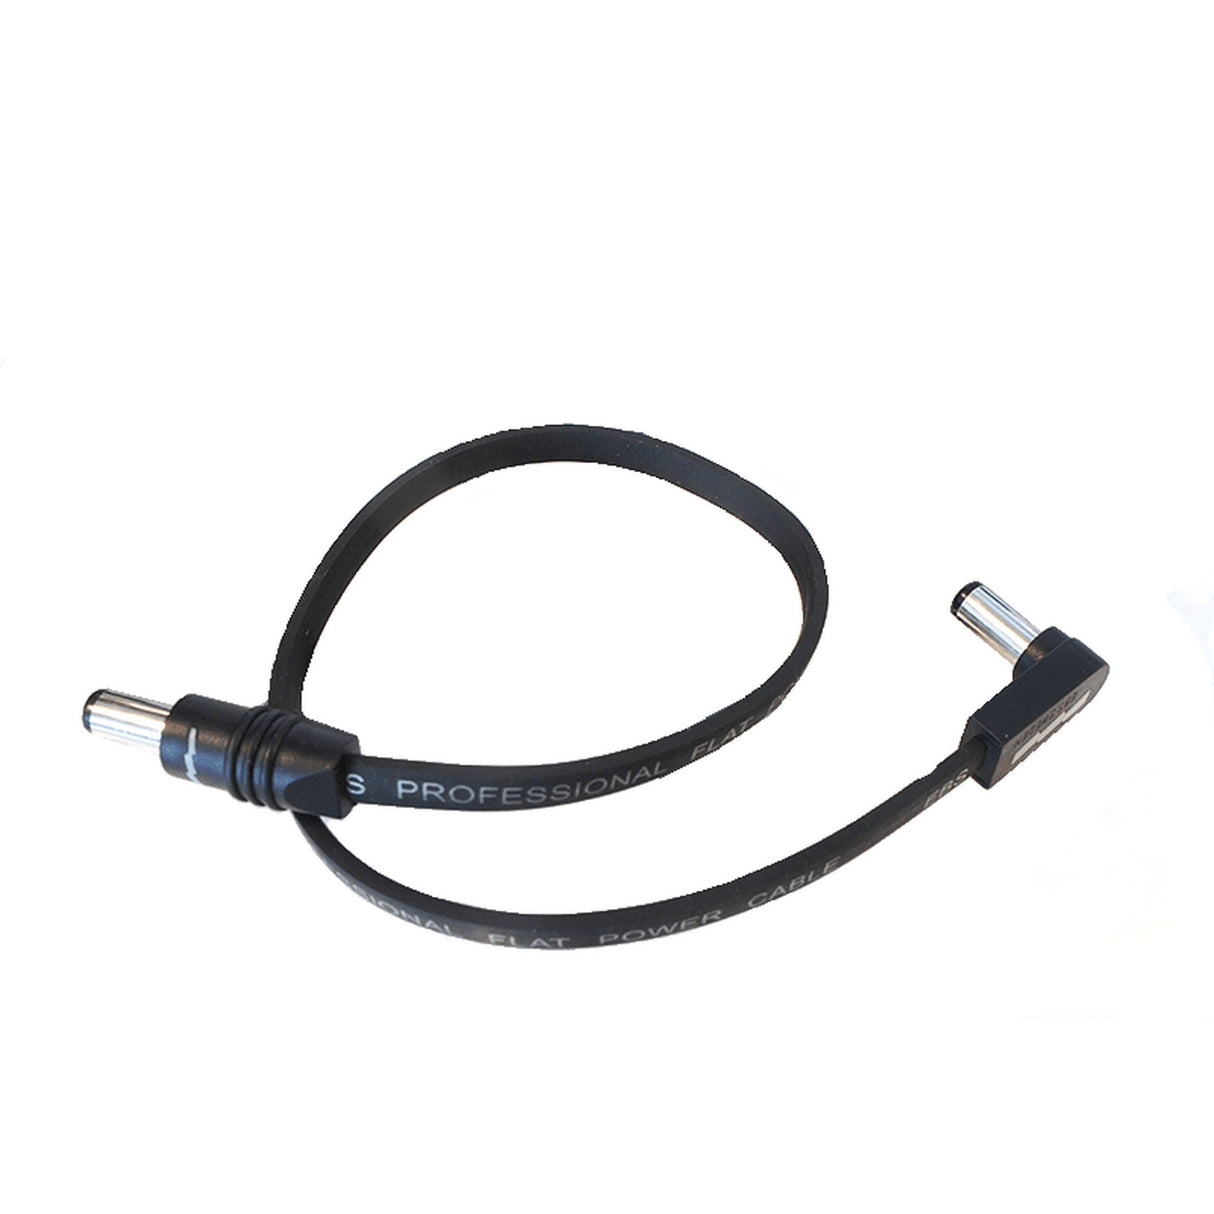 EBS DC1-18 90/90 Flat Power Cable, 18 Centimeters